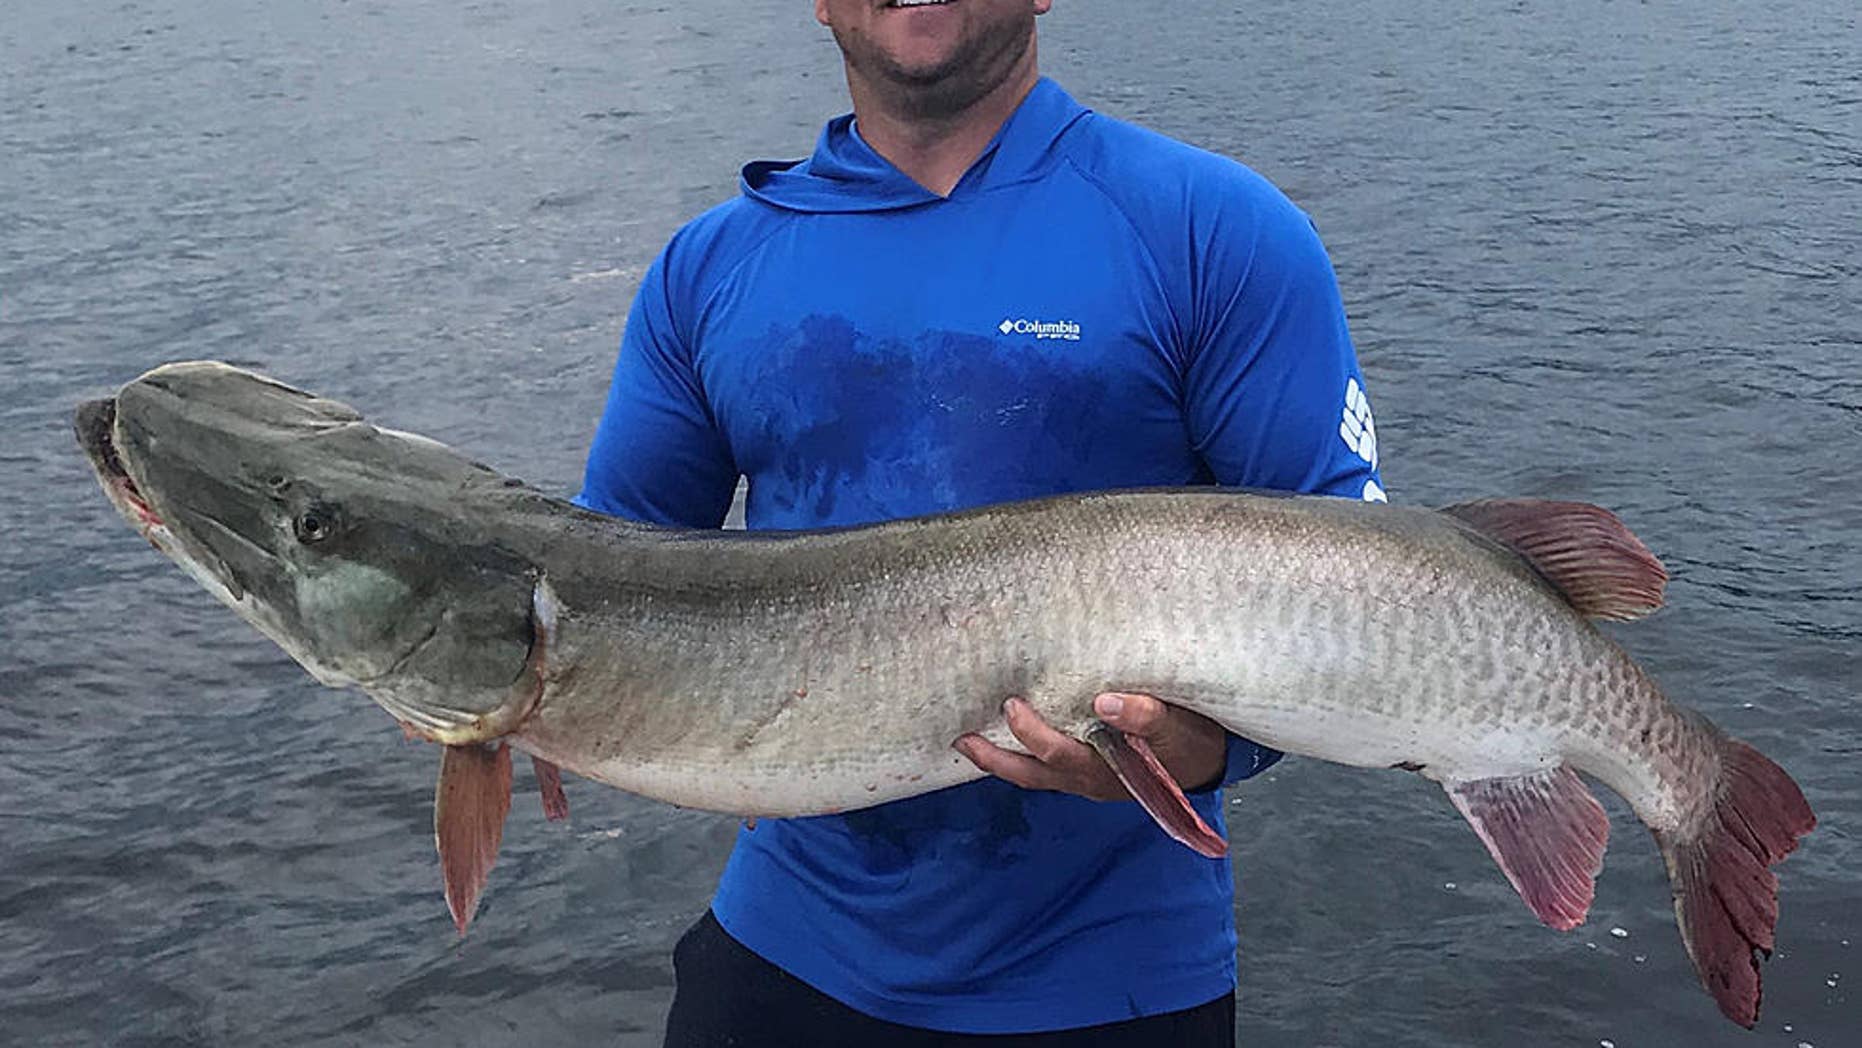 The record was set by Corey Kitzmann of Davenport, while he was fishing on Lake Vermillion while at his family’s cabin on August 6.